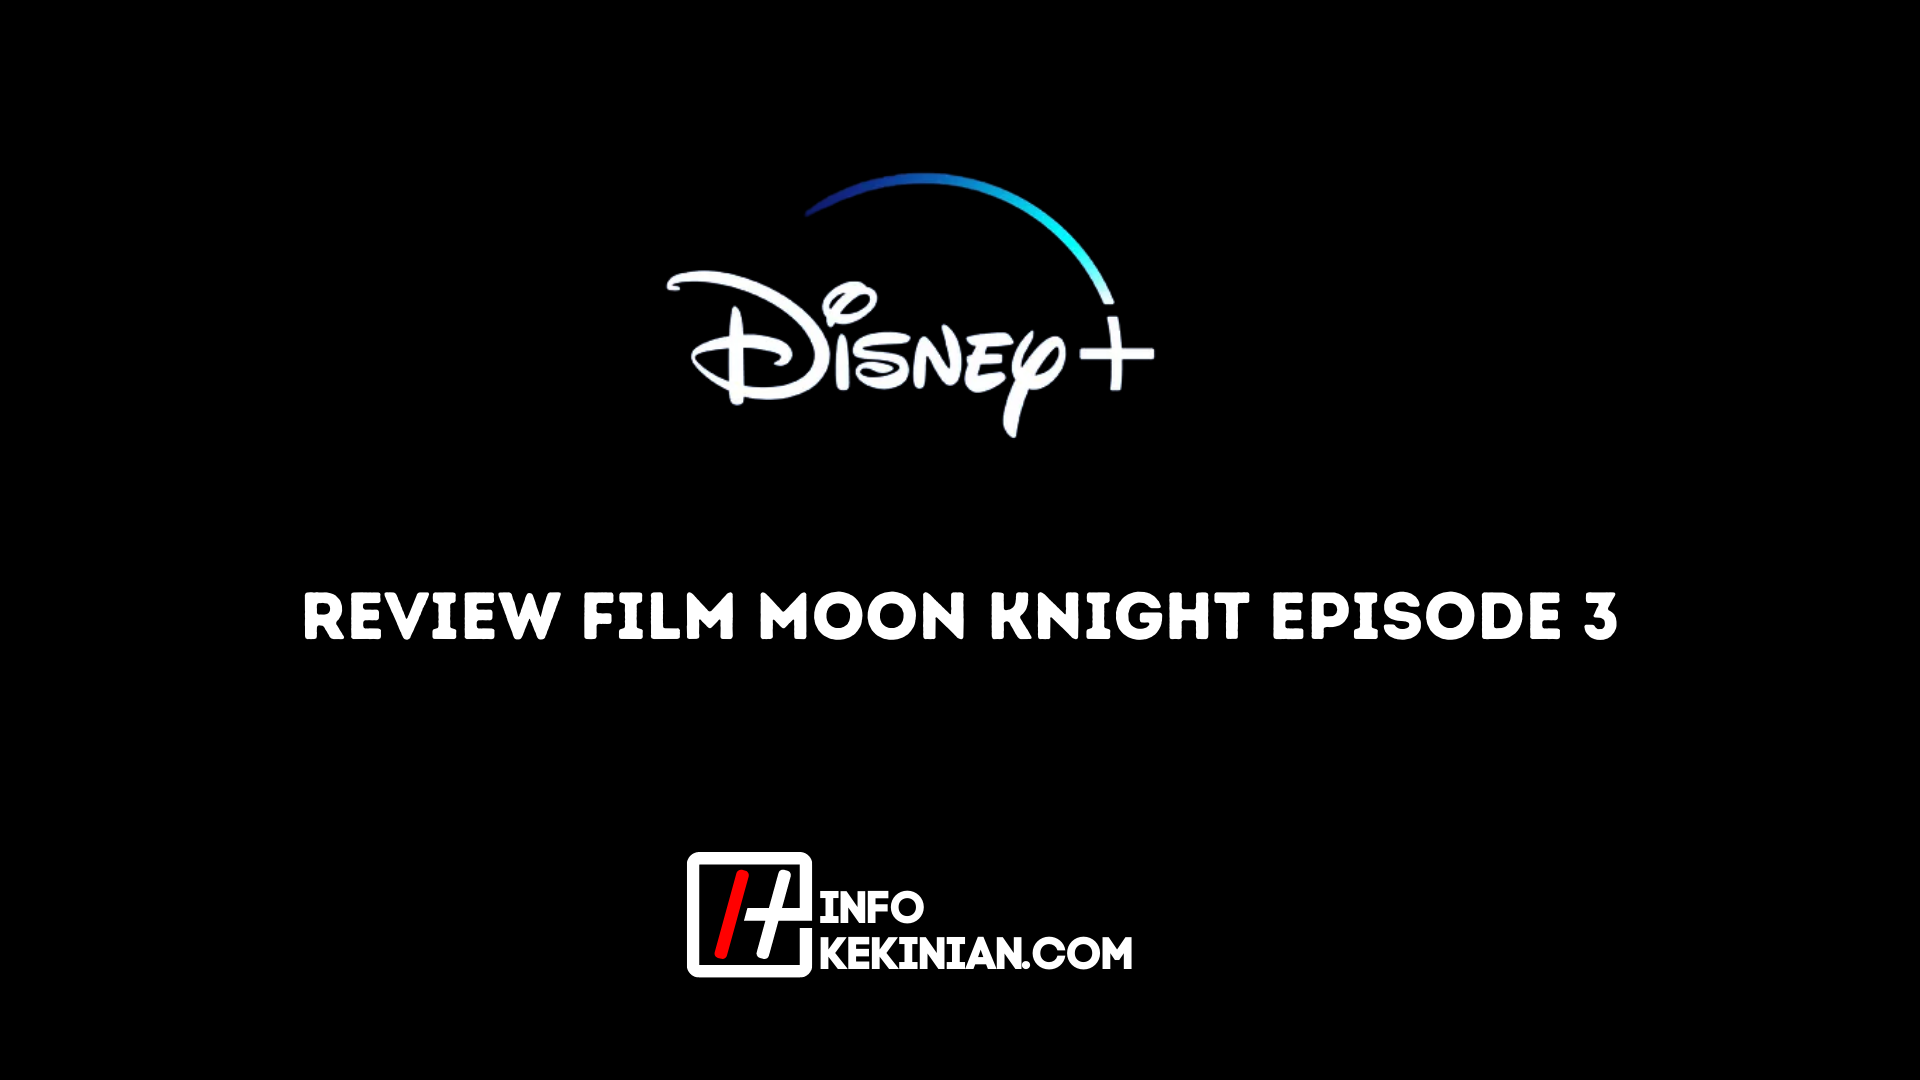 Review Film Moon Knight Episode 3